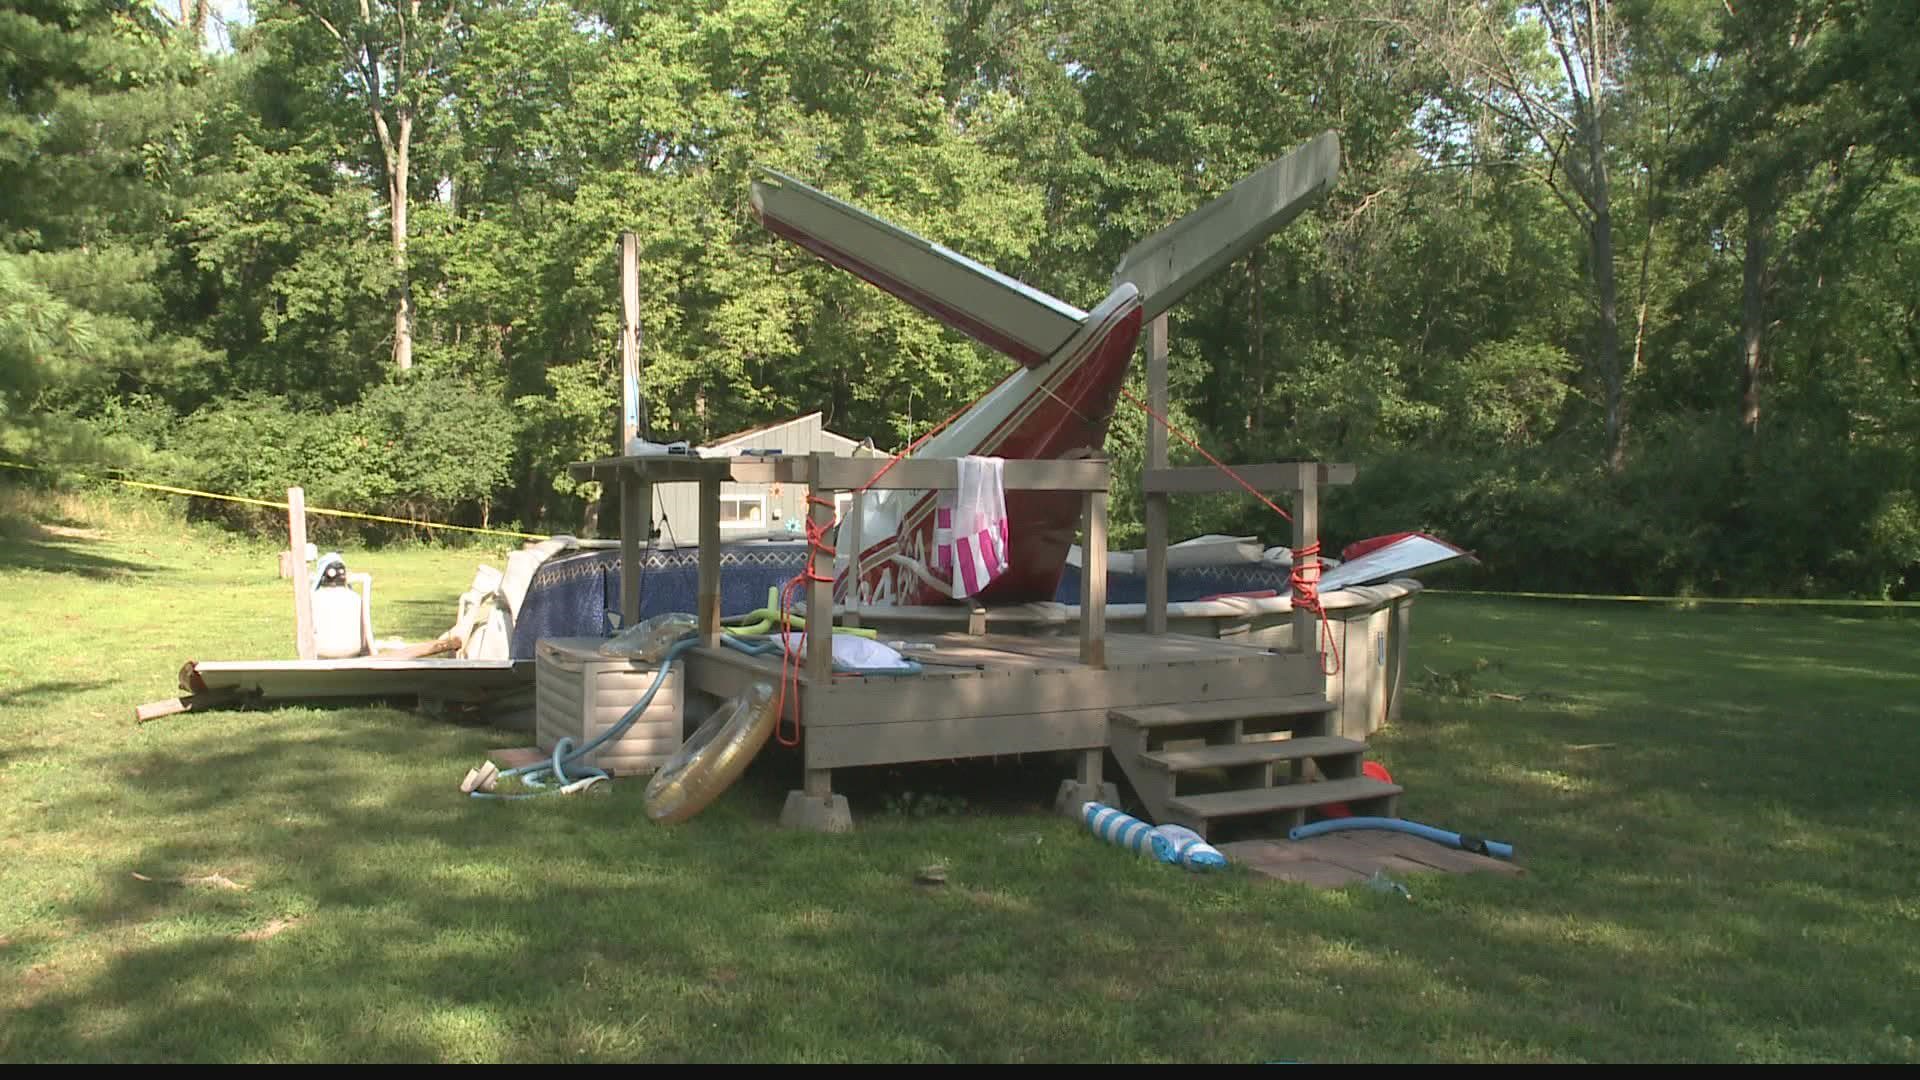 One person died and another was injured after a small plane crashed into a pool Saturday in Centralia, Illinois. It is unclear what caused the crash.